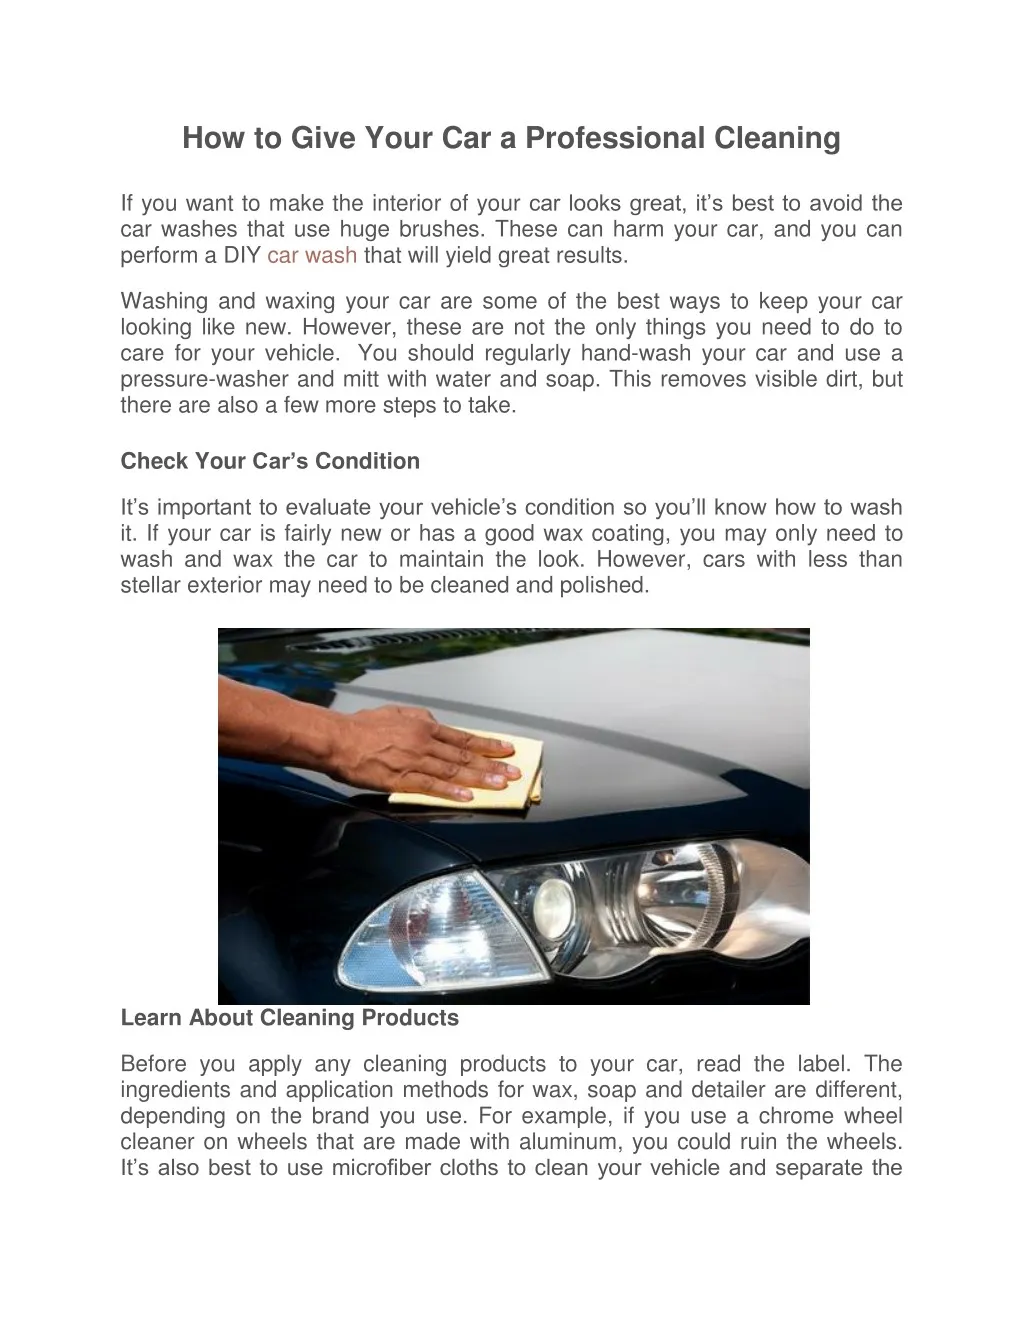 how to give your car a professional cleaning